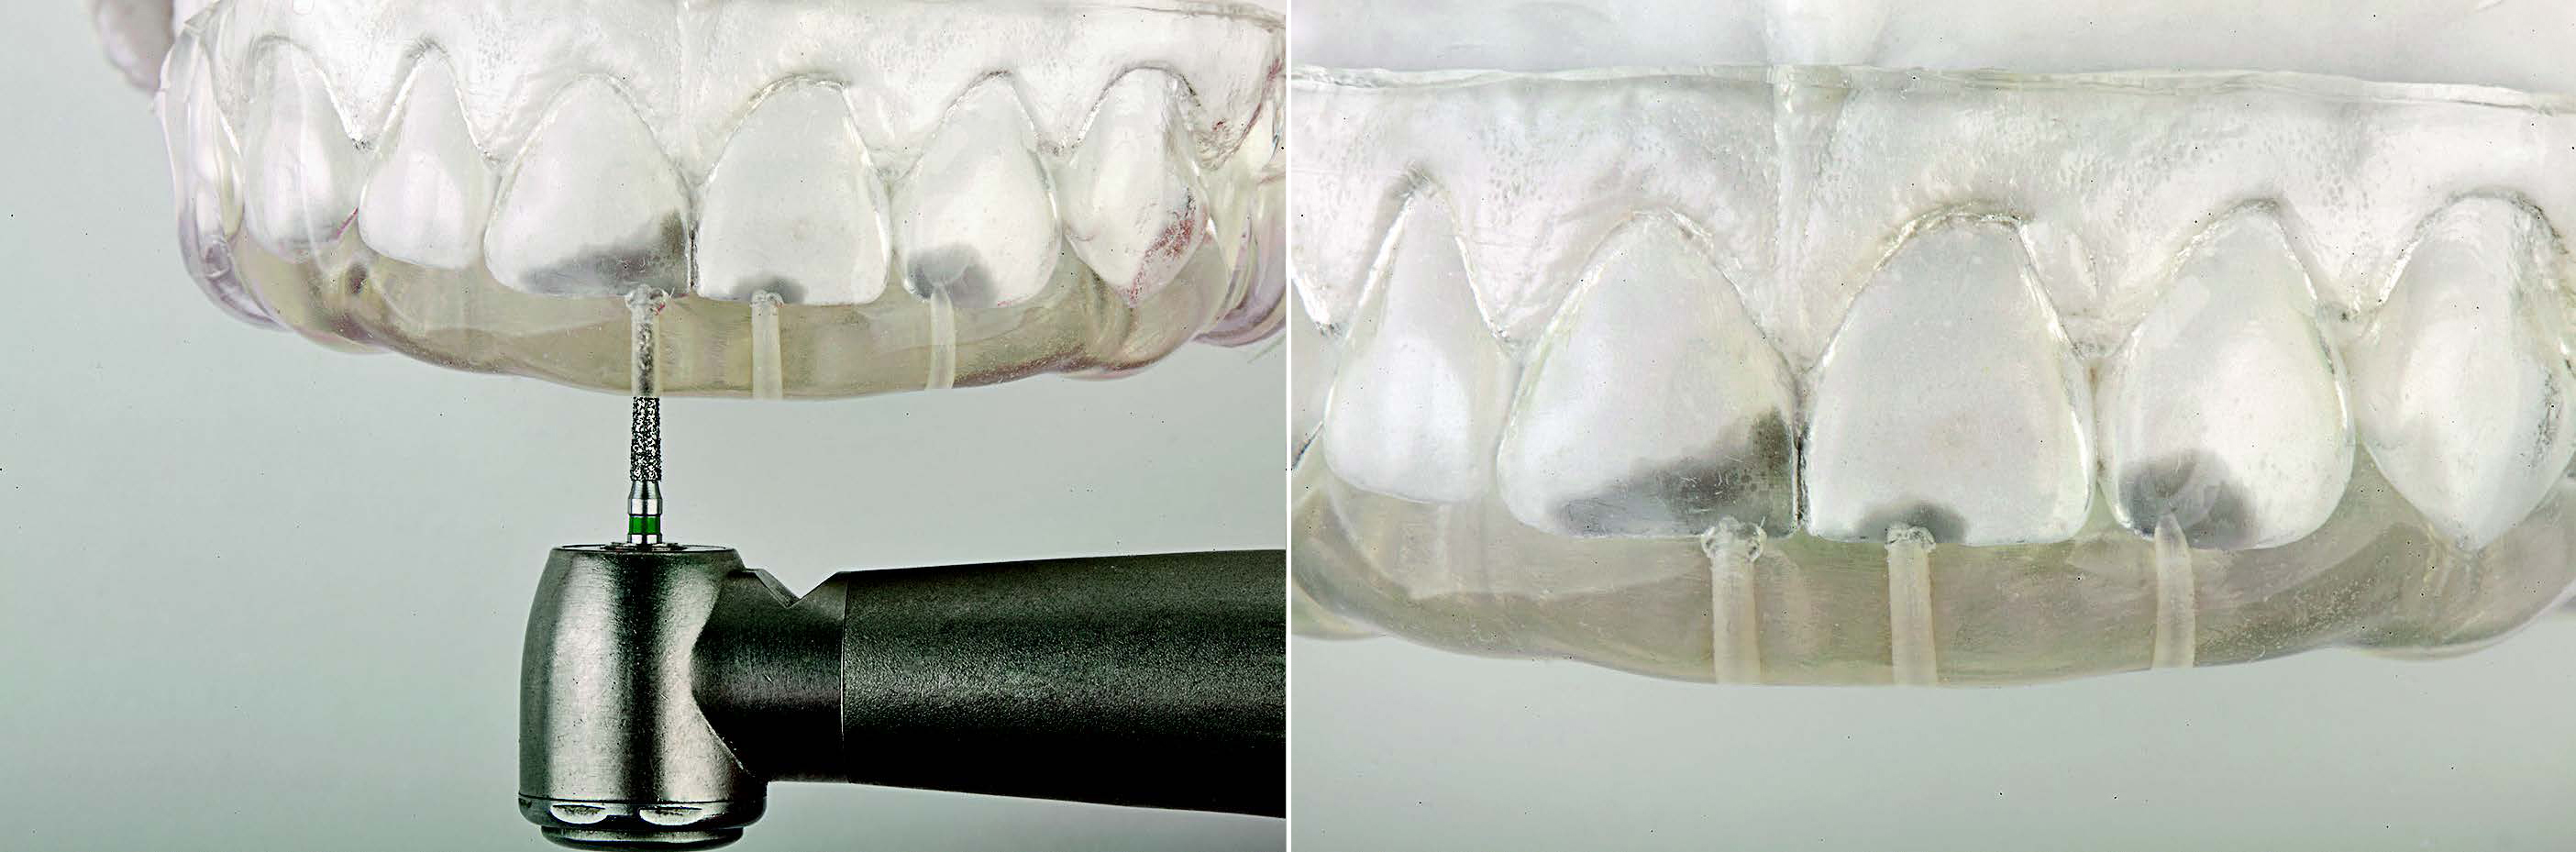 A clear PVS matrix (Exaclear, GC America) was fabricated to replicate the diagnostic wax-up using a nonperforated tray. A small opening was made above each tooth that was to be restored using a tapered diamond bur (6847, Brasseler USA).